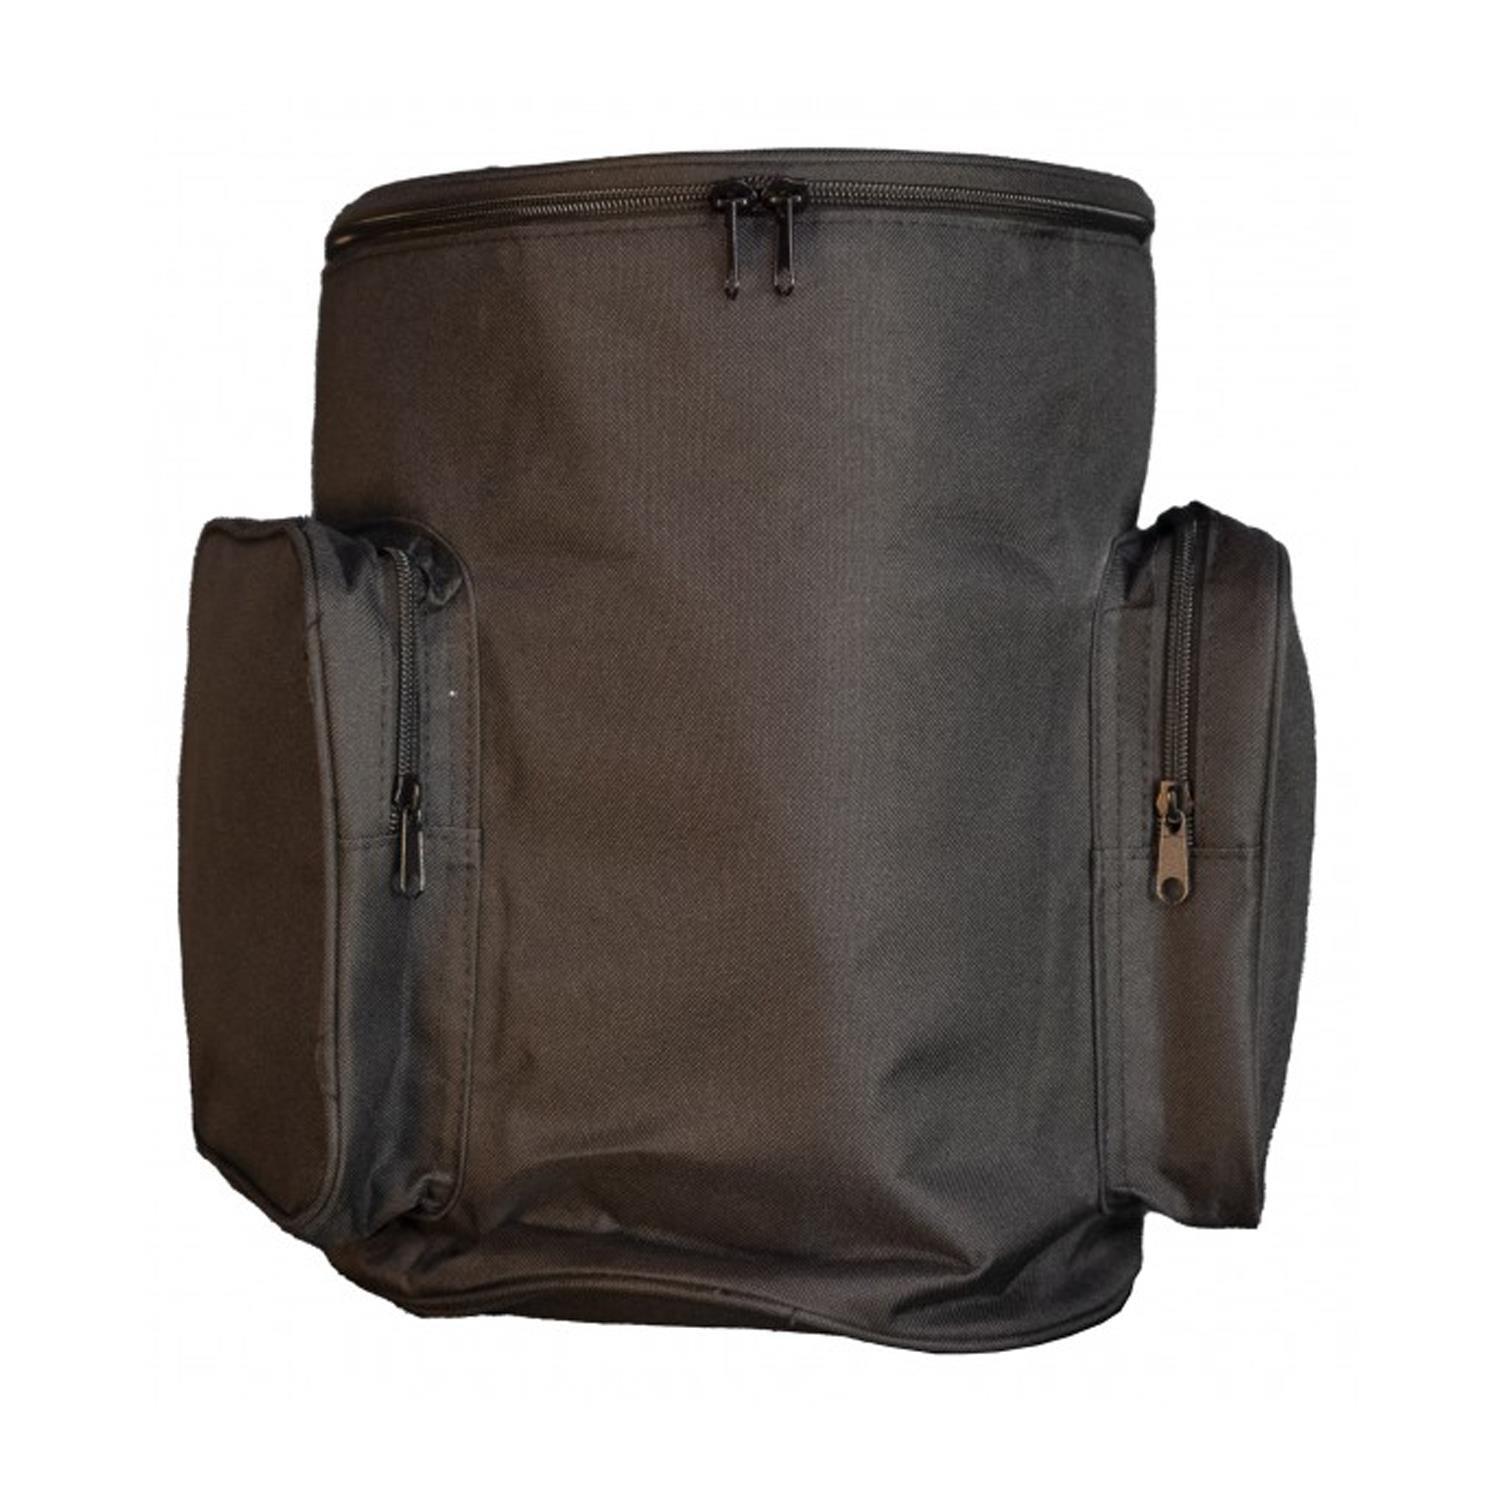 ZZiPP Protective Transport Bag for ZZIGGY Active Speaker - DY Pro Audio